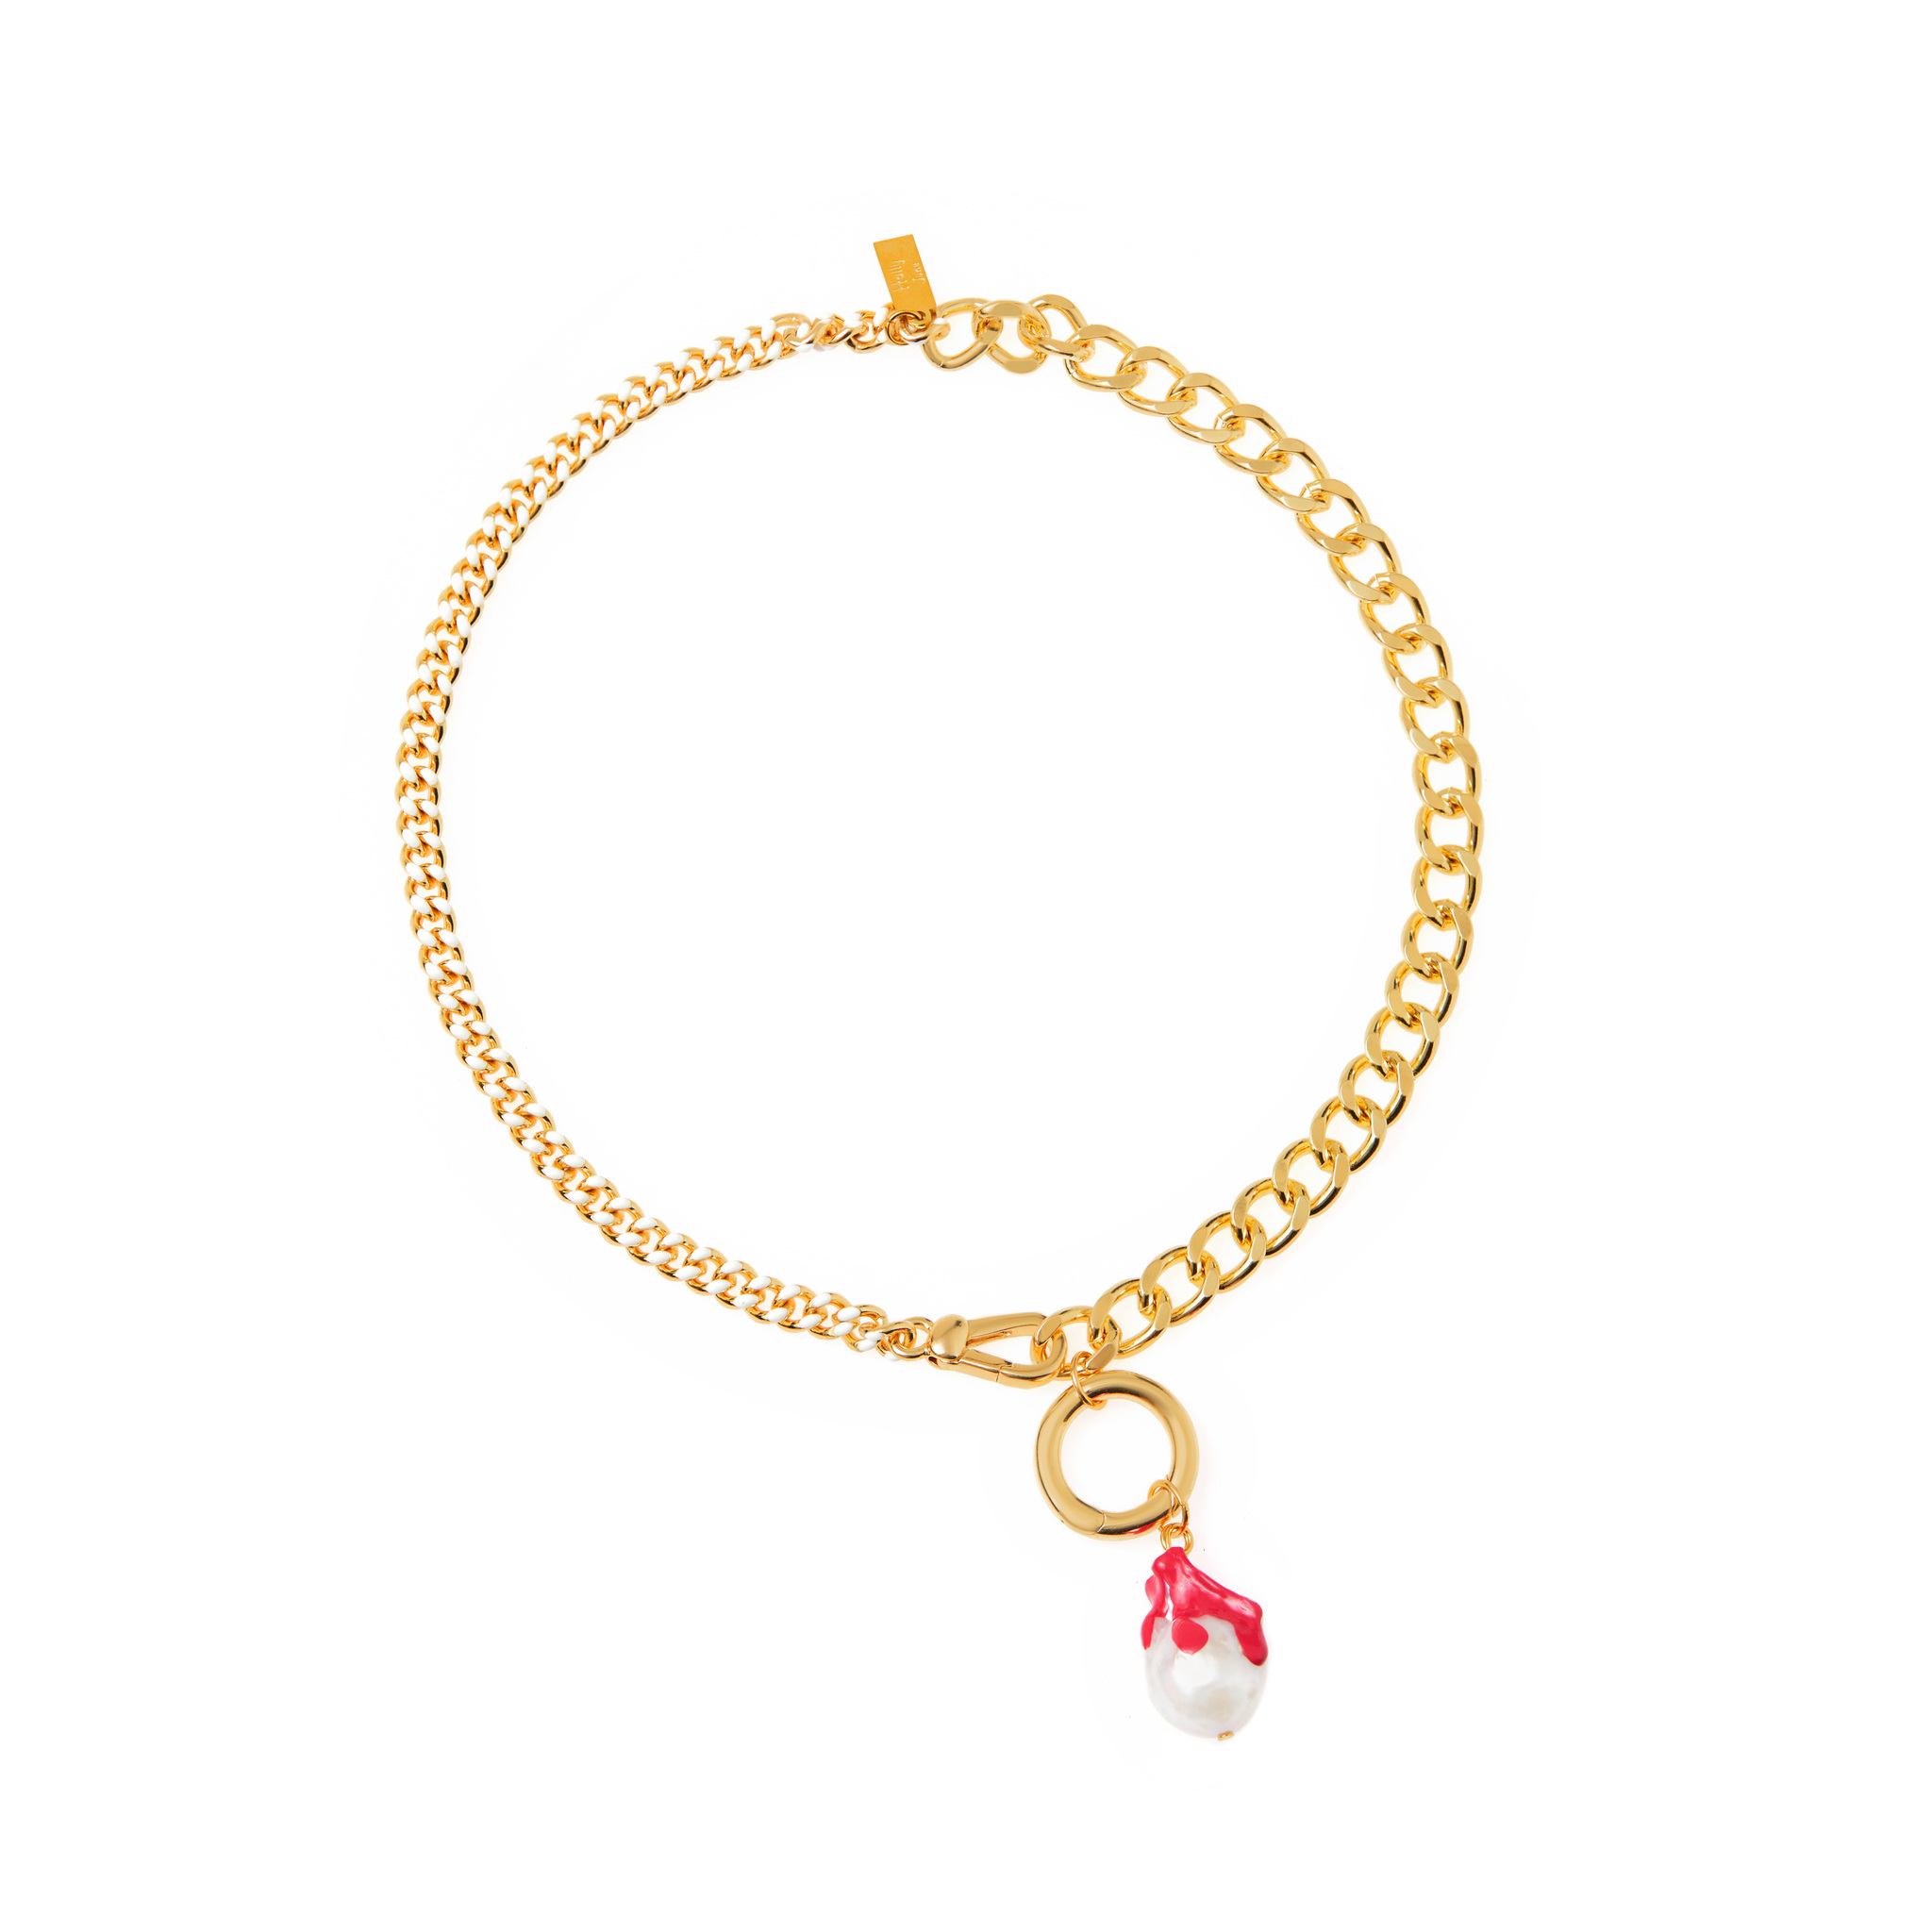 HOLLY JUNE Колье Pink Pearl Drop Necklace – Gold holly june колье major pearl twist necklace